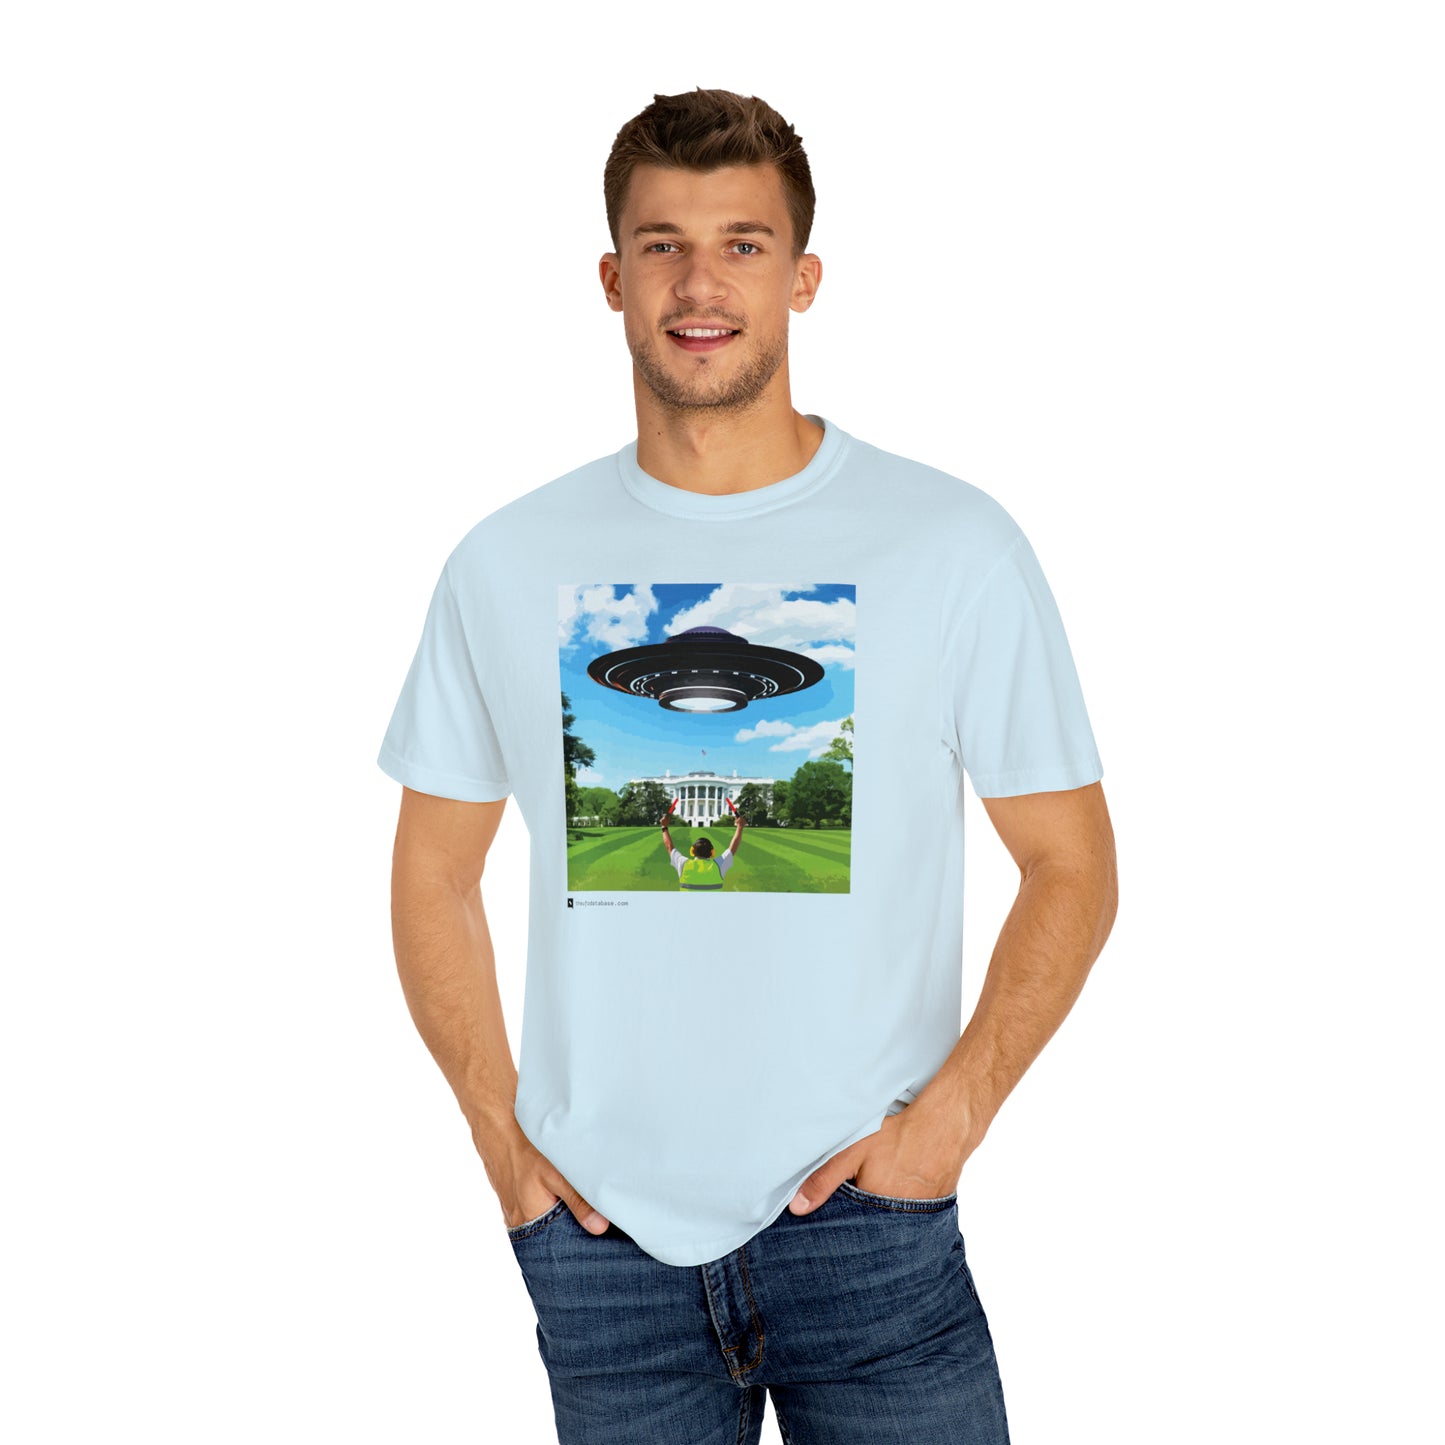 UFO Landing on The White House Lawn T-Shirt